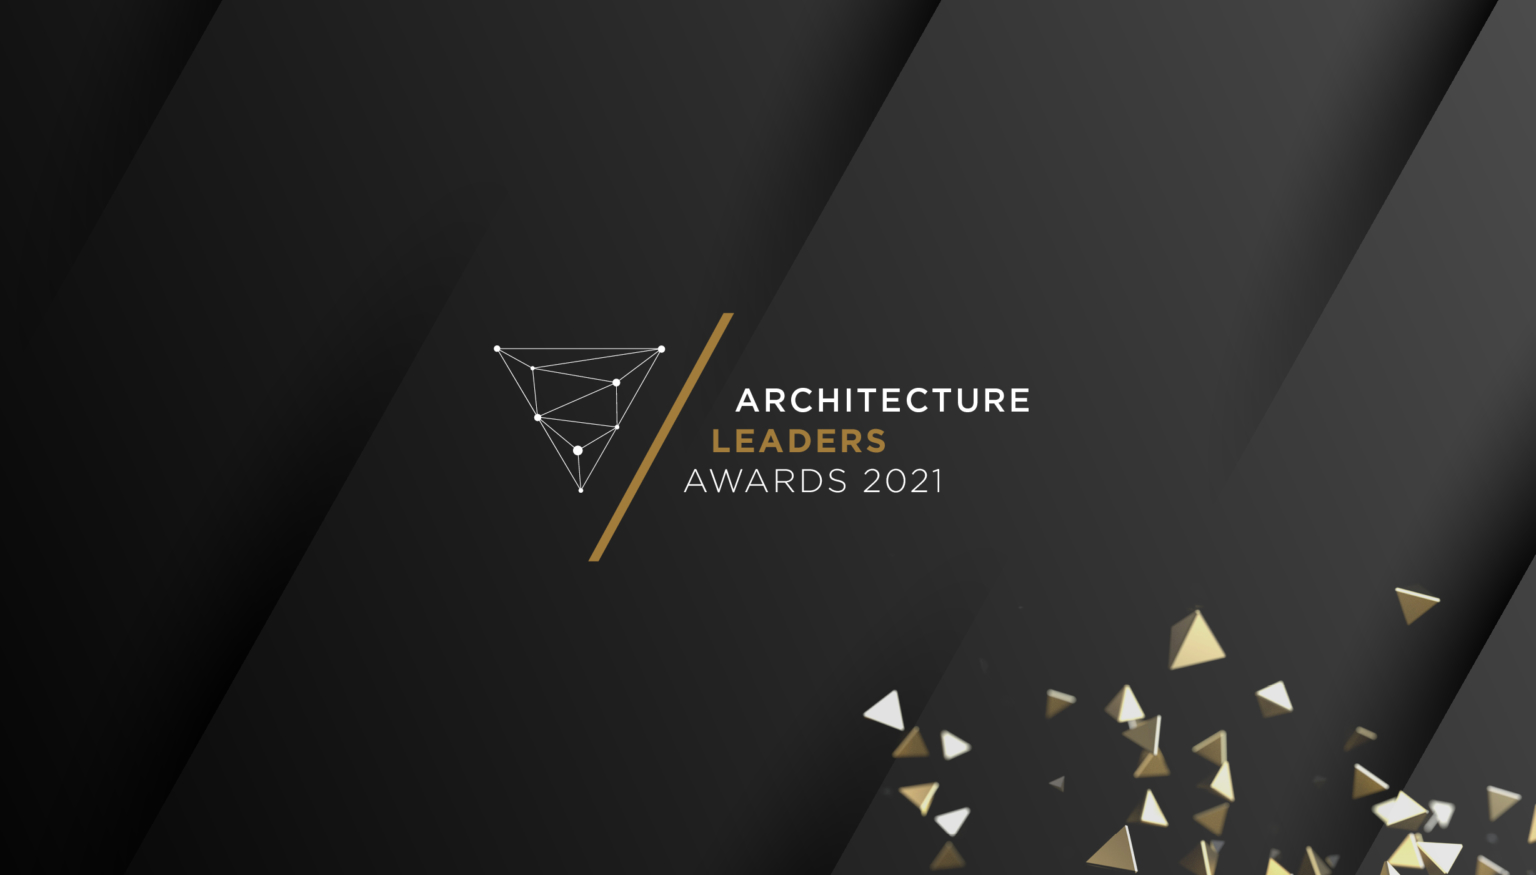 Graphic of architecture leaders awards 2021 with gold and silver text geometric shapes